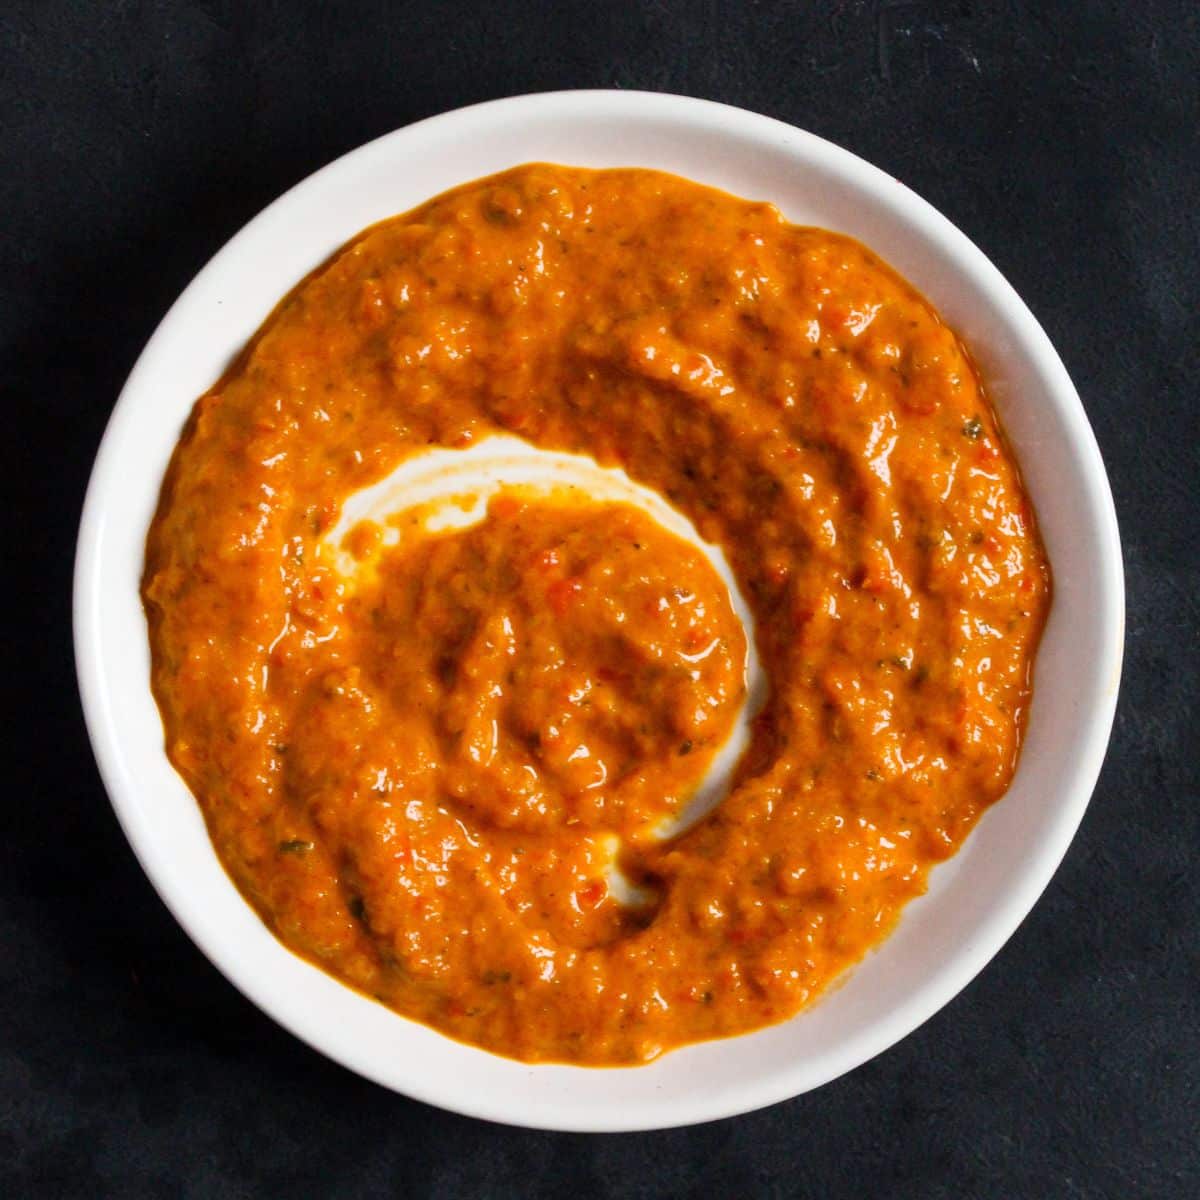 peri peri sauce on a small plate on a black background.